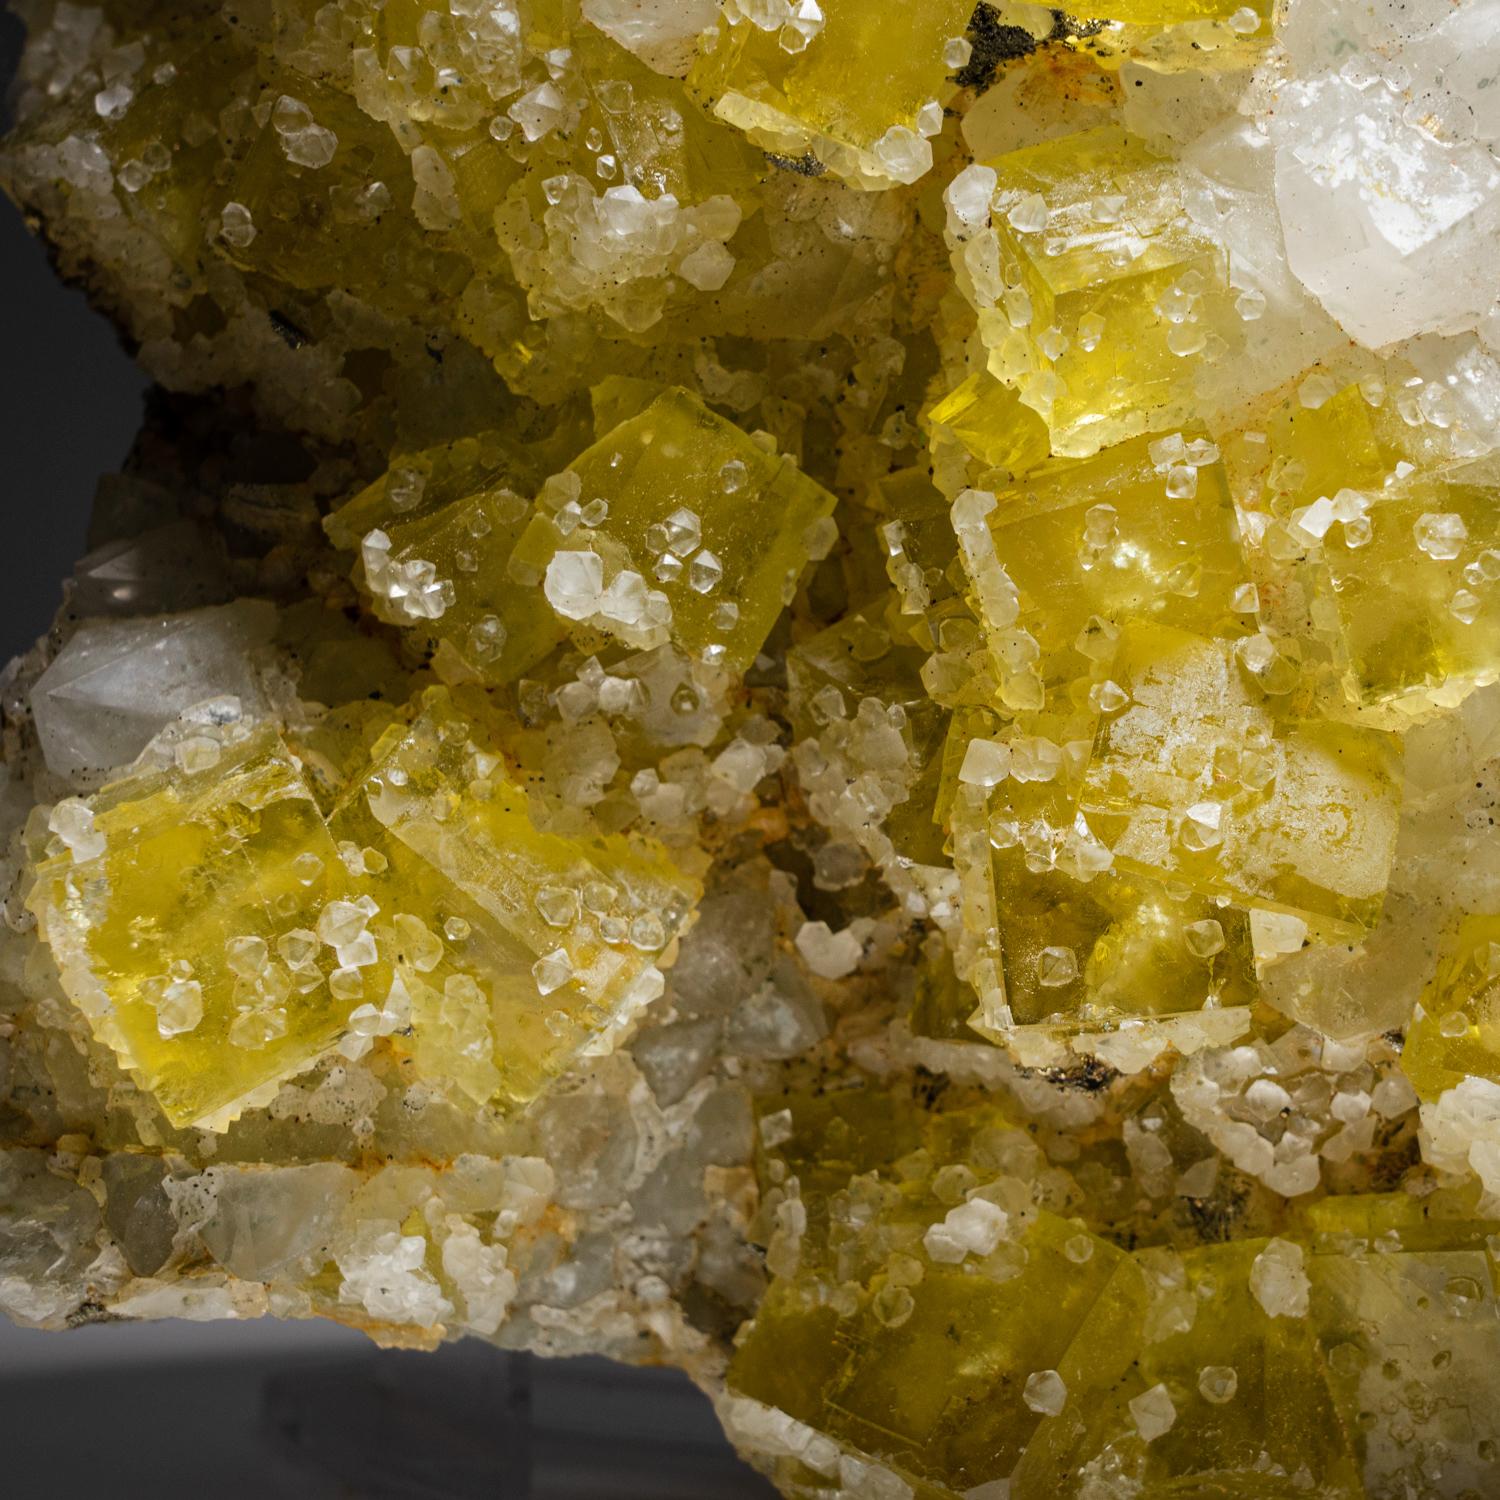 Crystal Yellow Fluorite with Quartz from Moscona Mine, Villabona District, Asturias, Spa For Sale